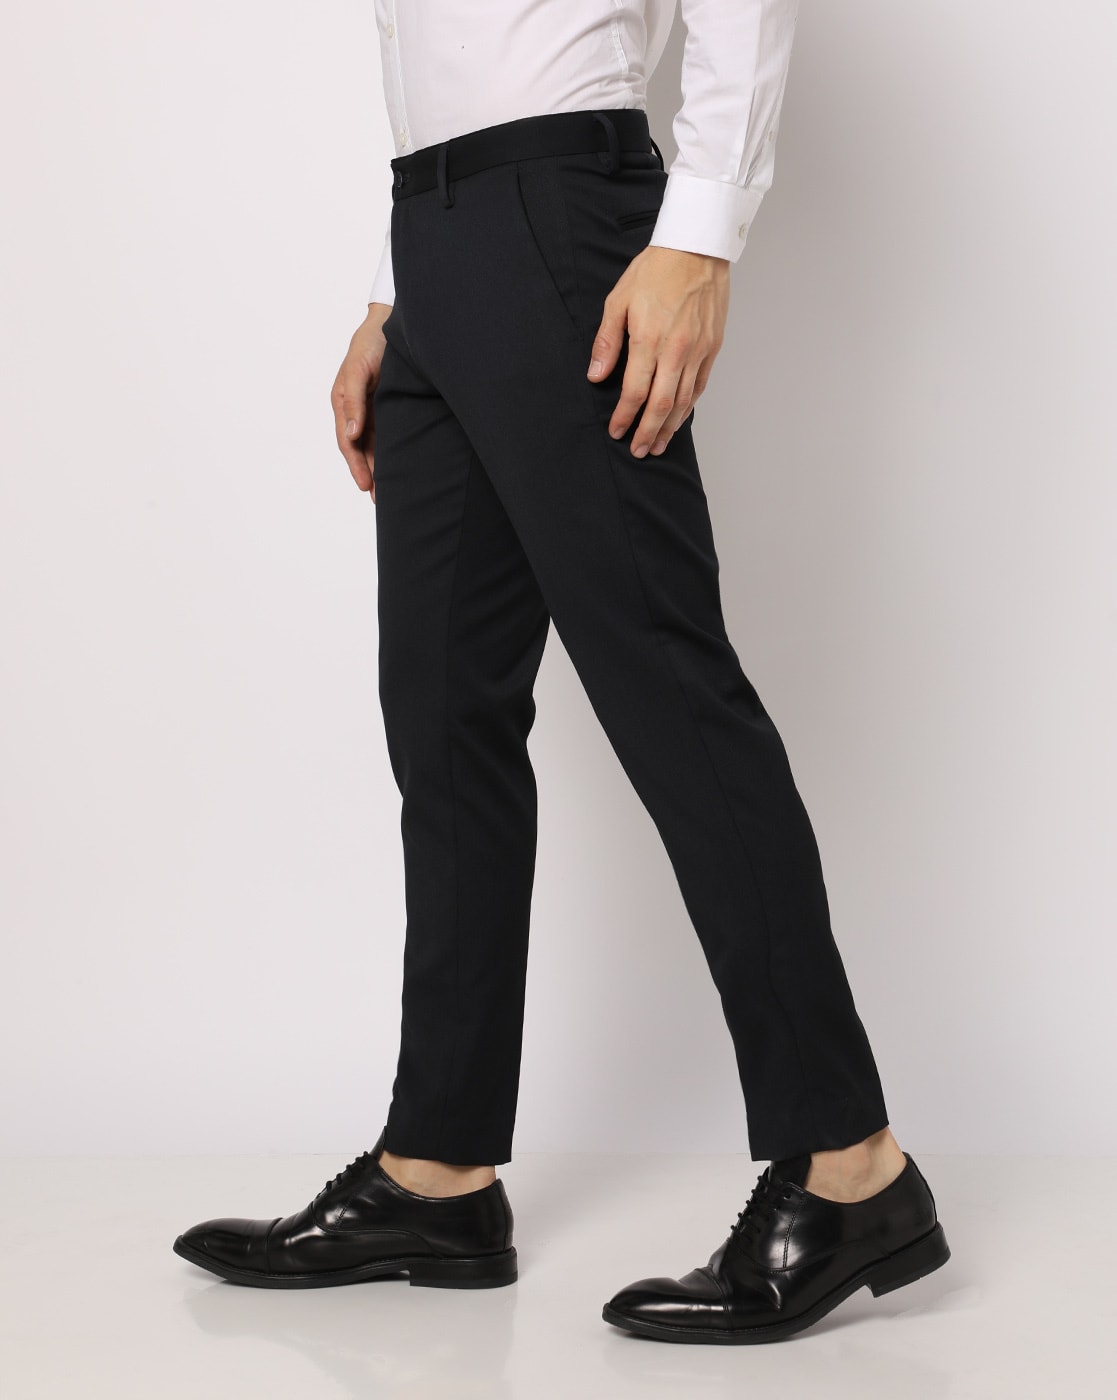 Cotton Black Formal Pant And Shirt Pleated Trousers Office Wear